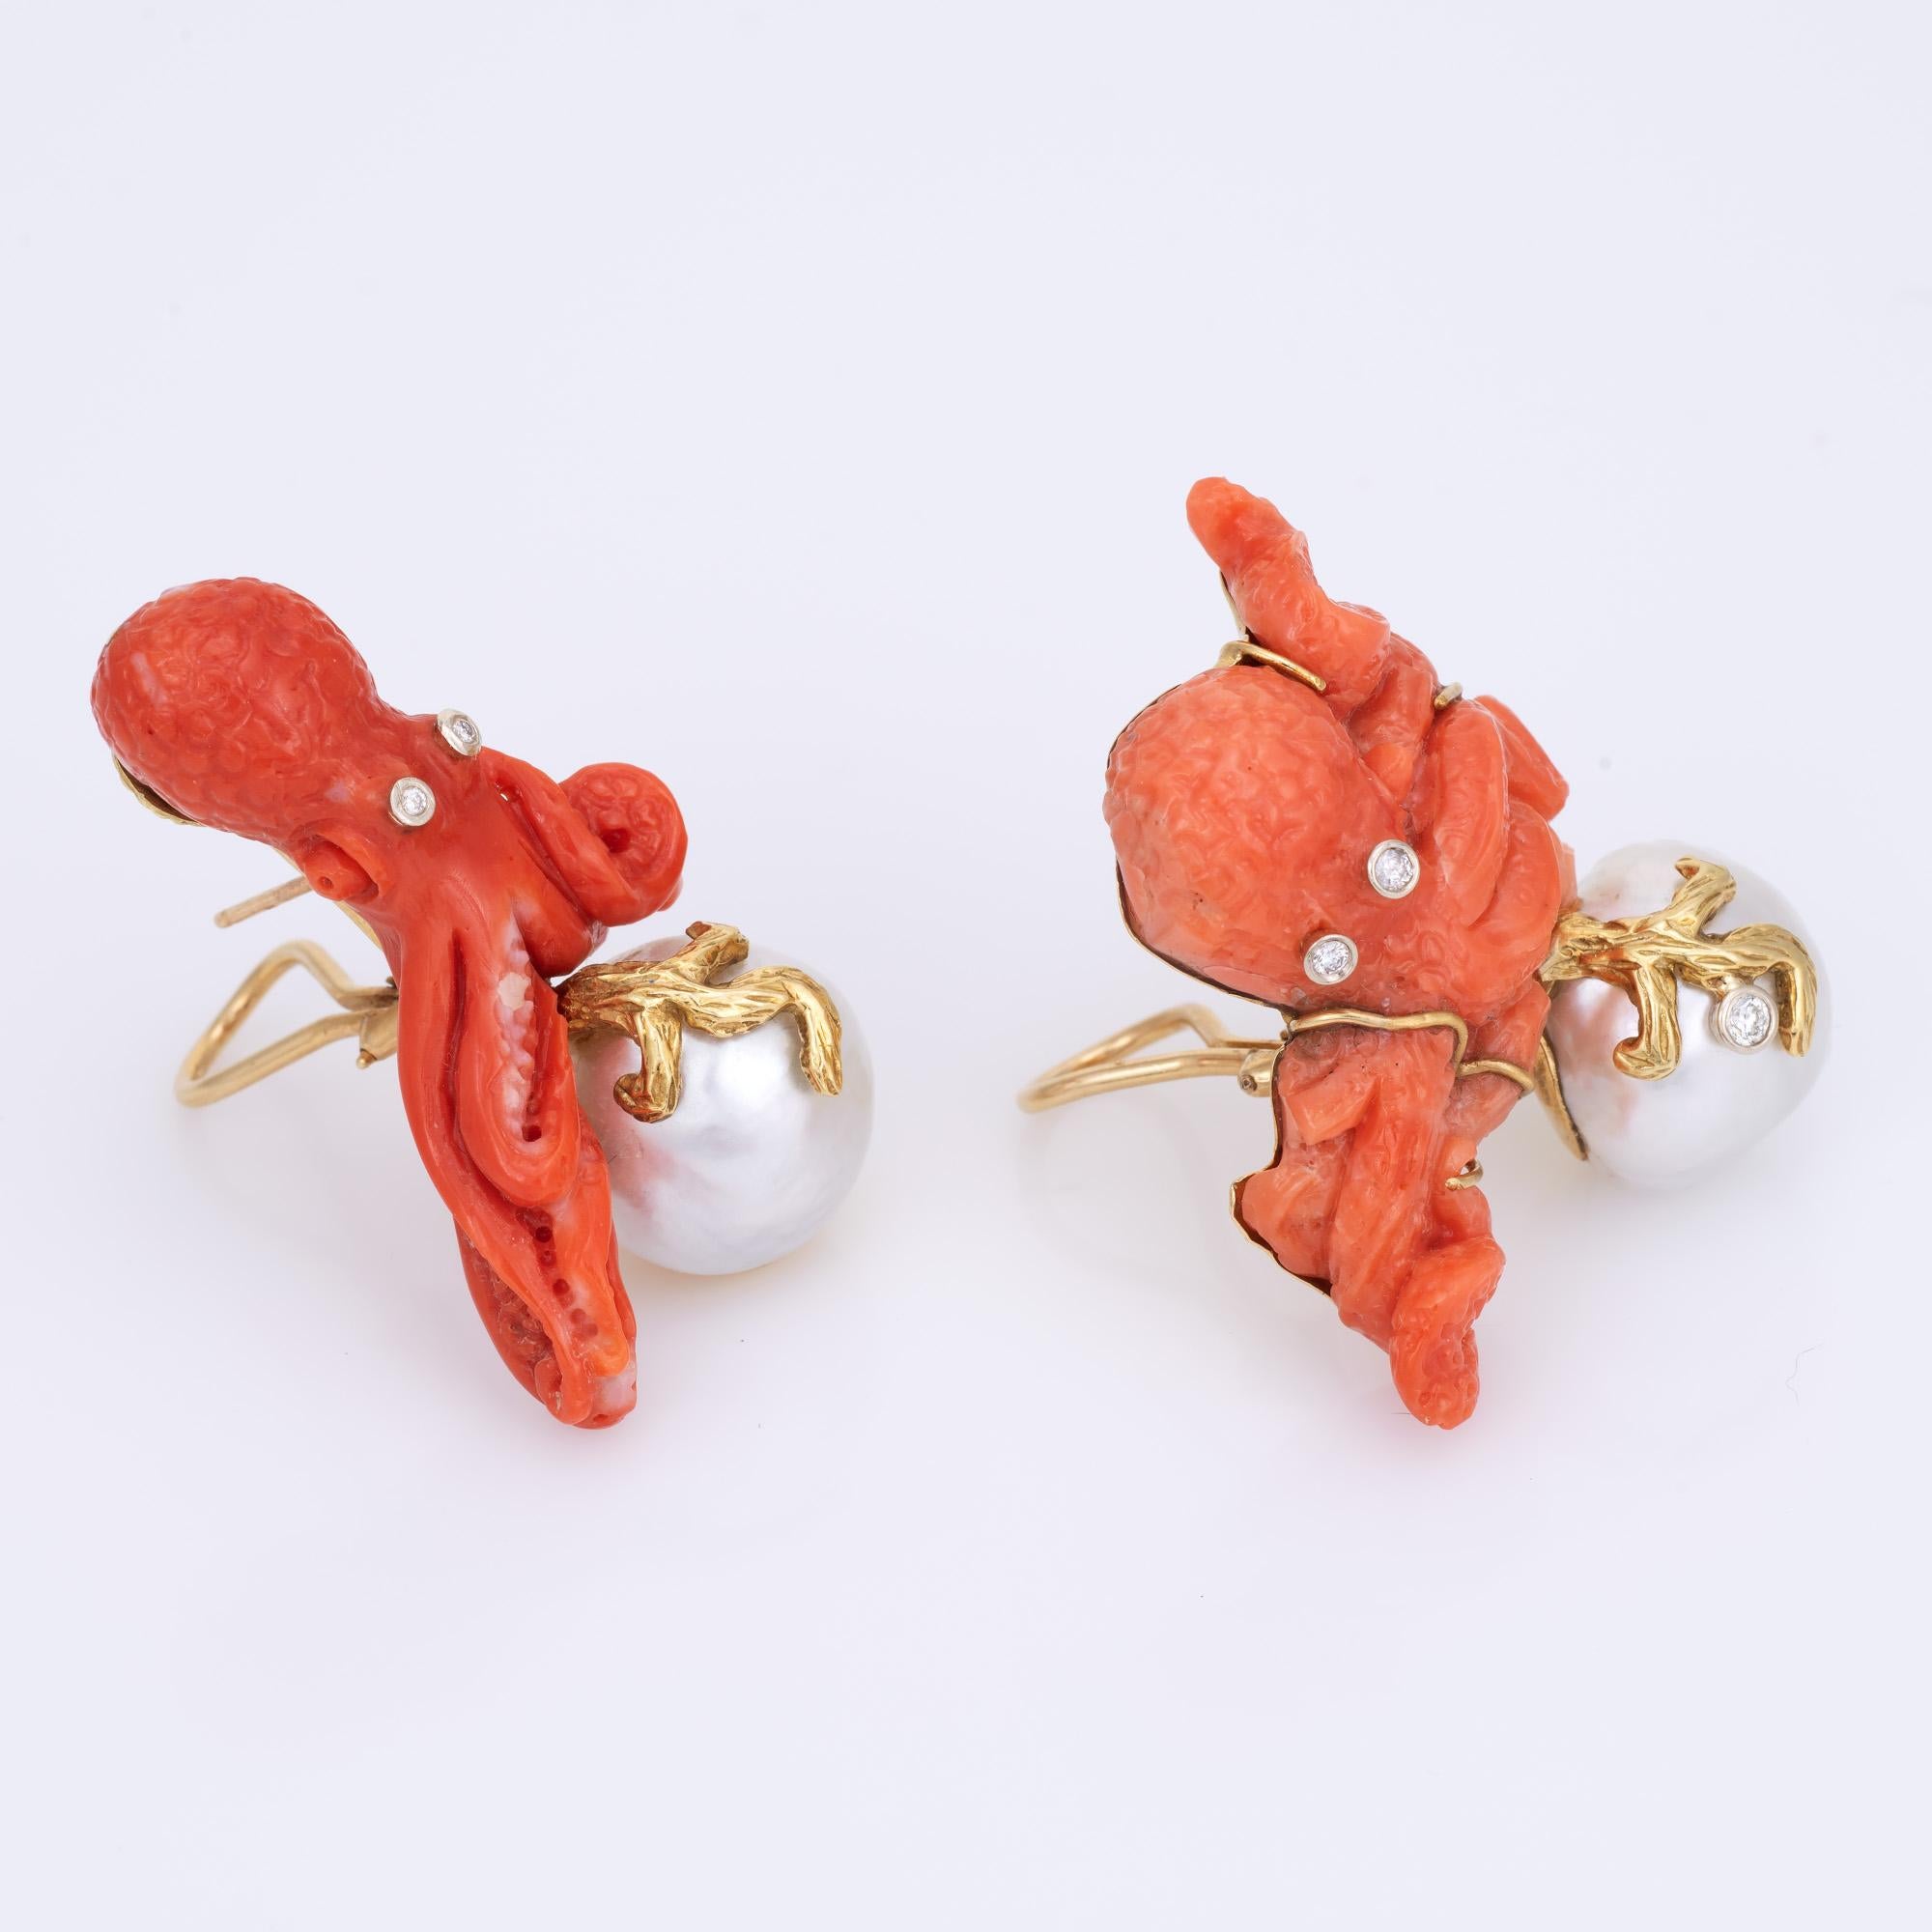 Distinct and unique carved coral, pearl & diamond Octopus earrings crafted in 18k yellow gold. 

Carved coral measures 1 1/4 x 1 1/4 and 1 1/2 x 1 inch. Baroque pearls each measure 16mm. Diamonds total an estimated 0.14 carats (estimated at H-I